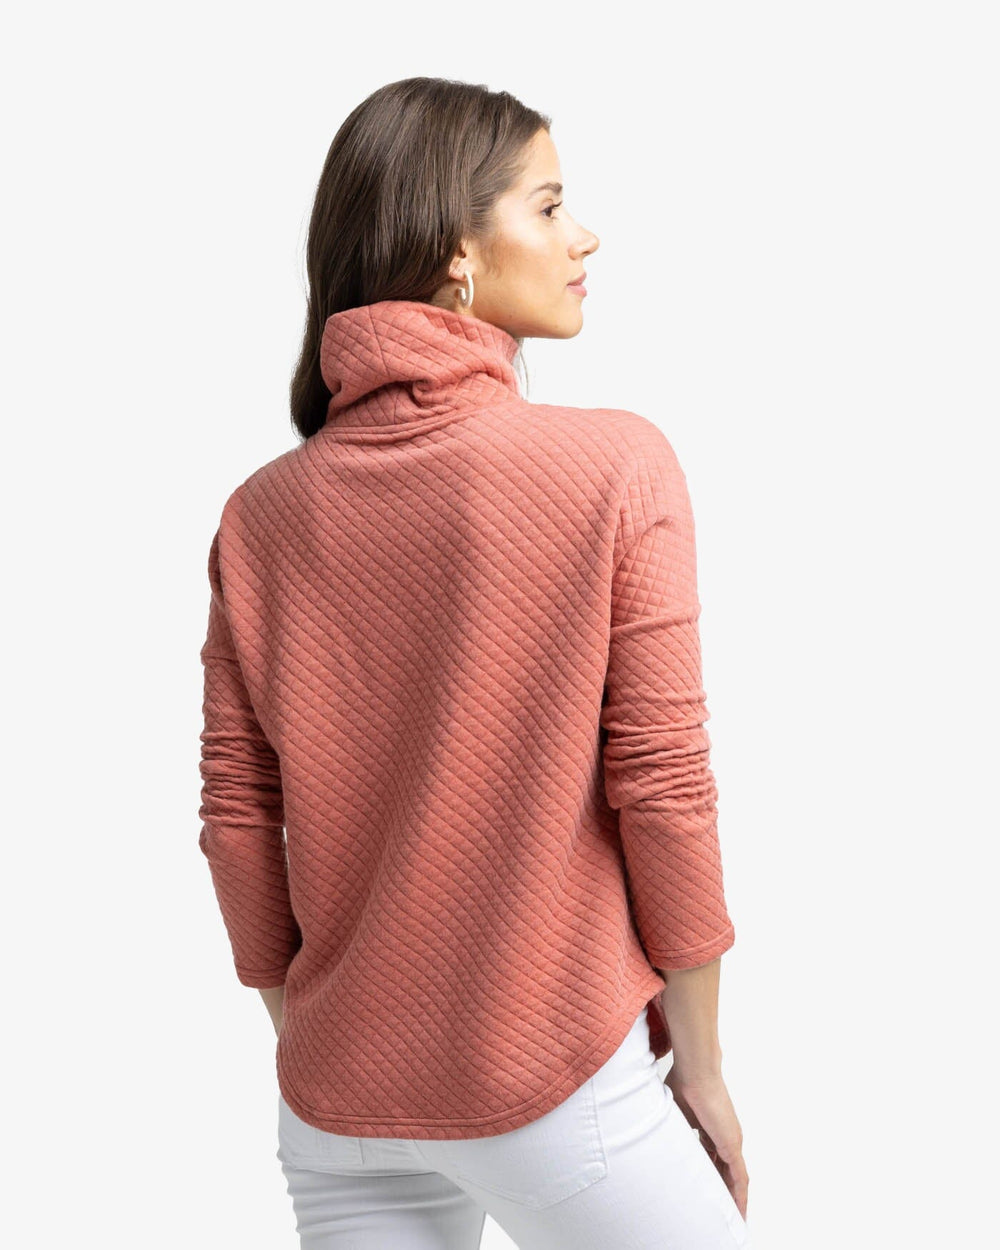 The back view of the Southern Tide Mellie MockNeck Sweatshirt by Southern Tide - Dusty Coral